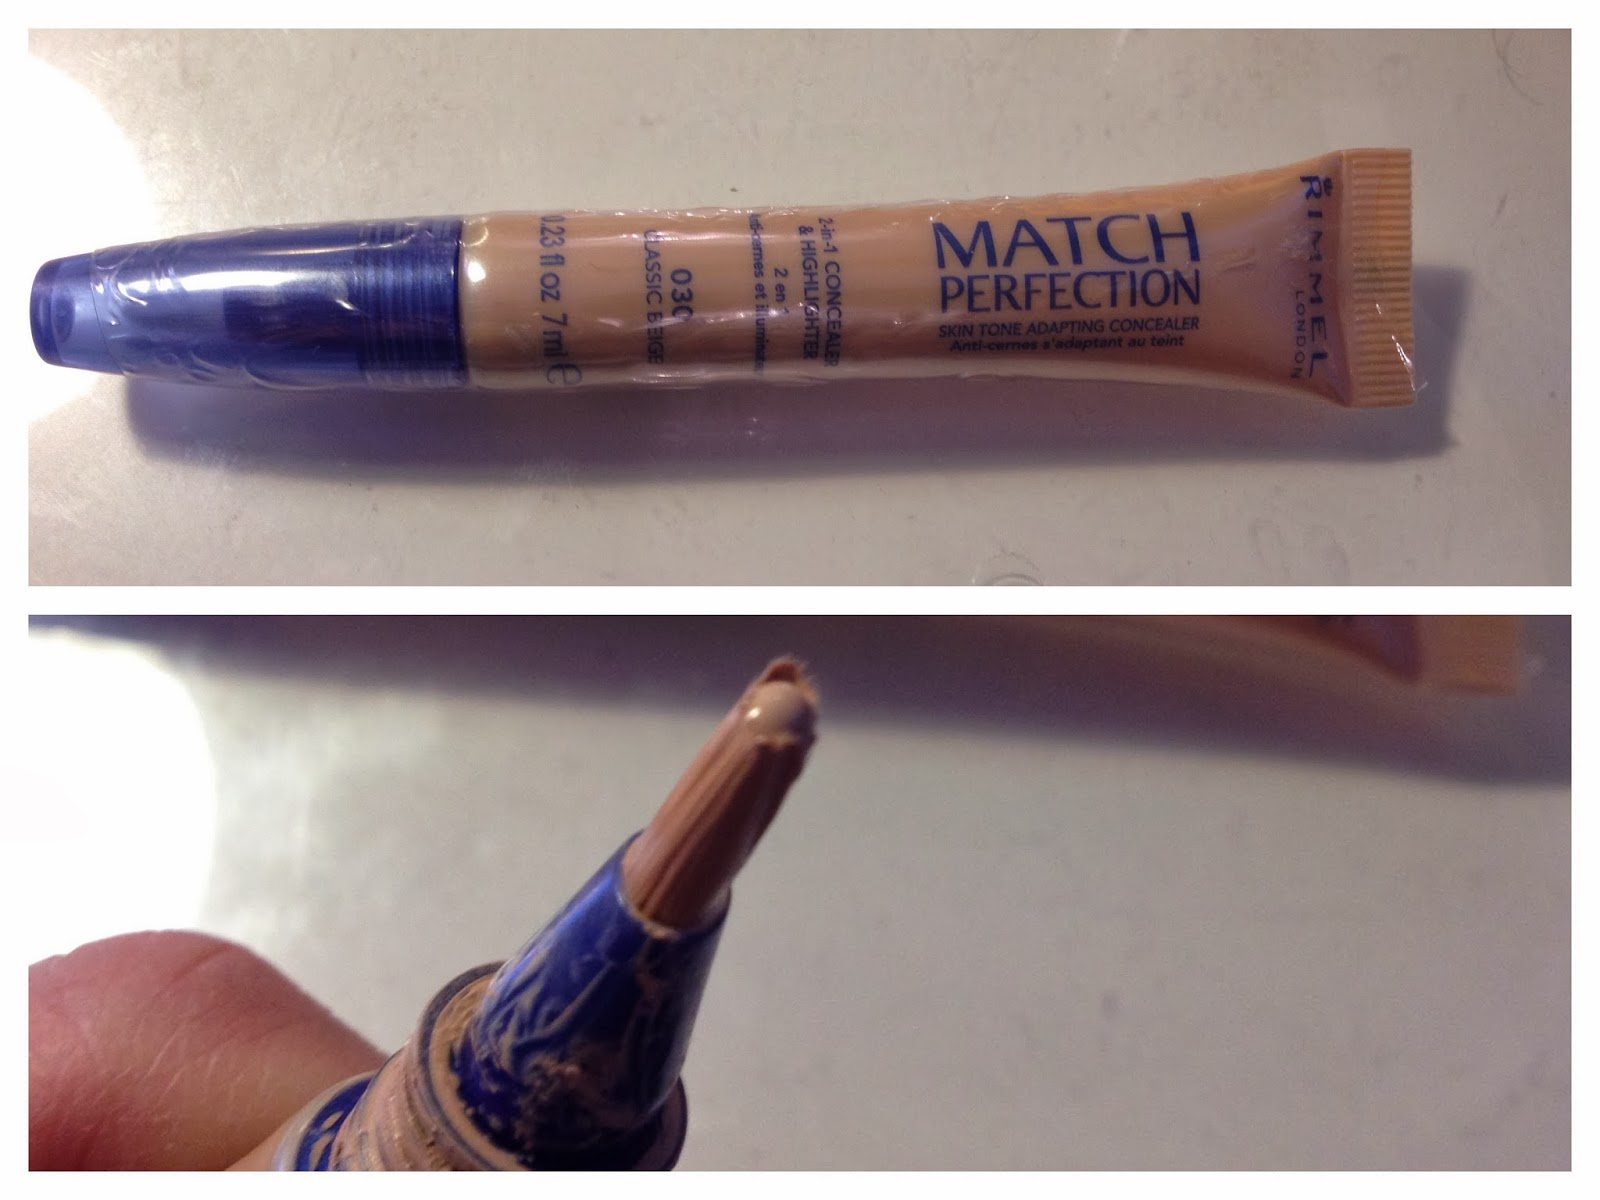 My Beautopia: Rimmel Match Perfection Concealer: A Review